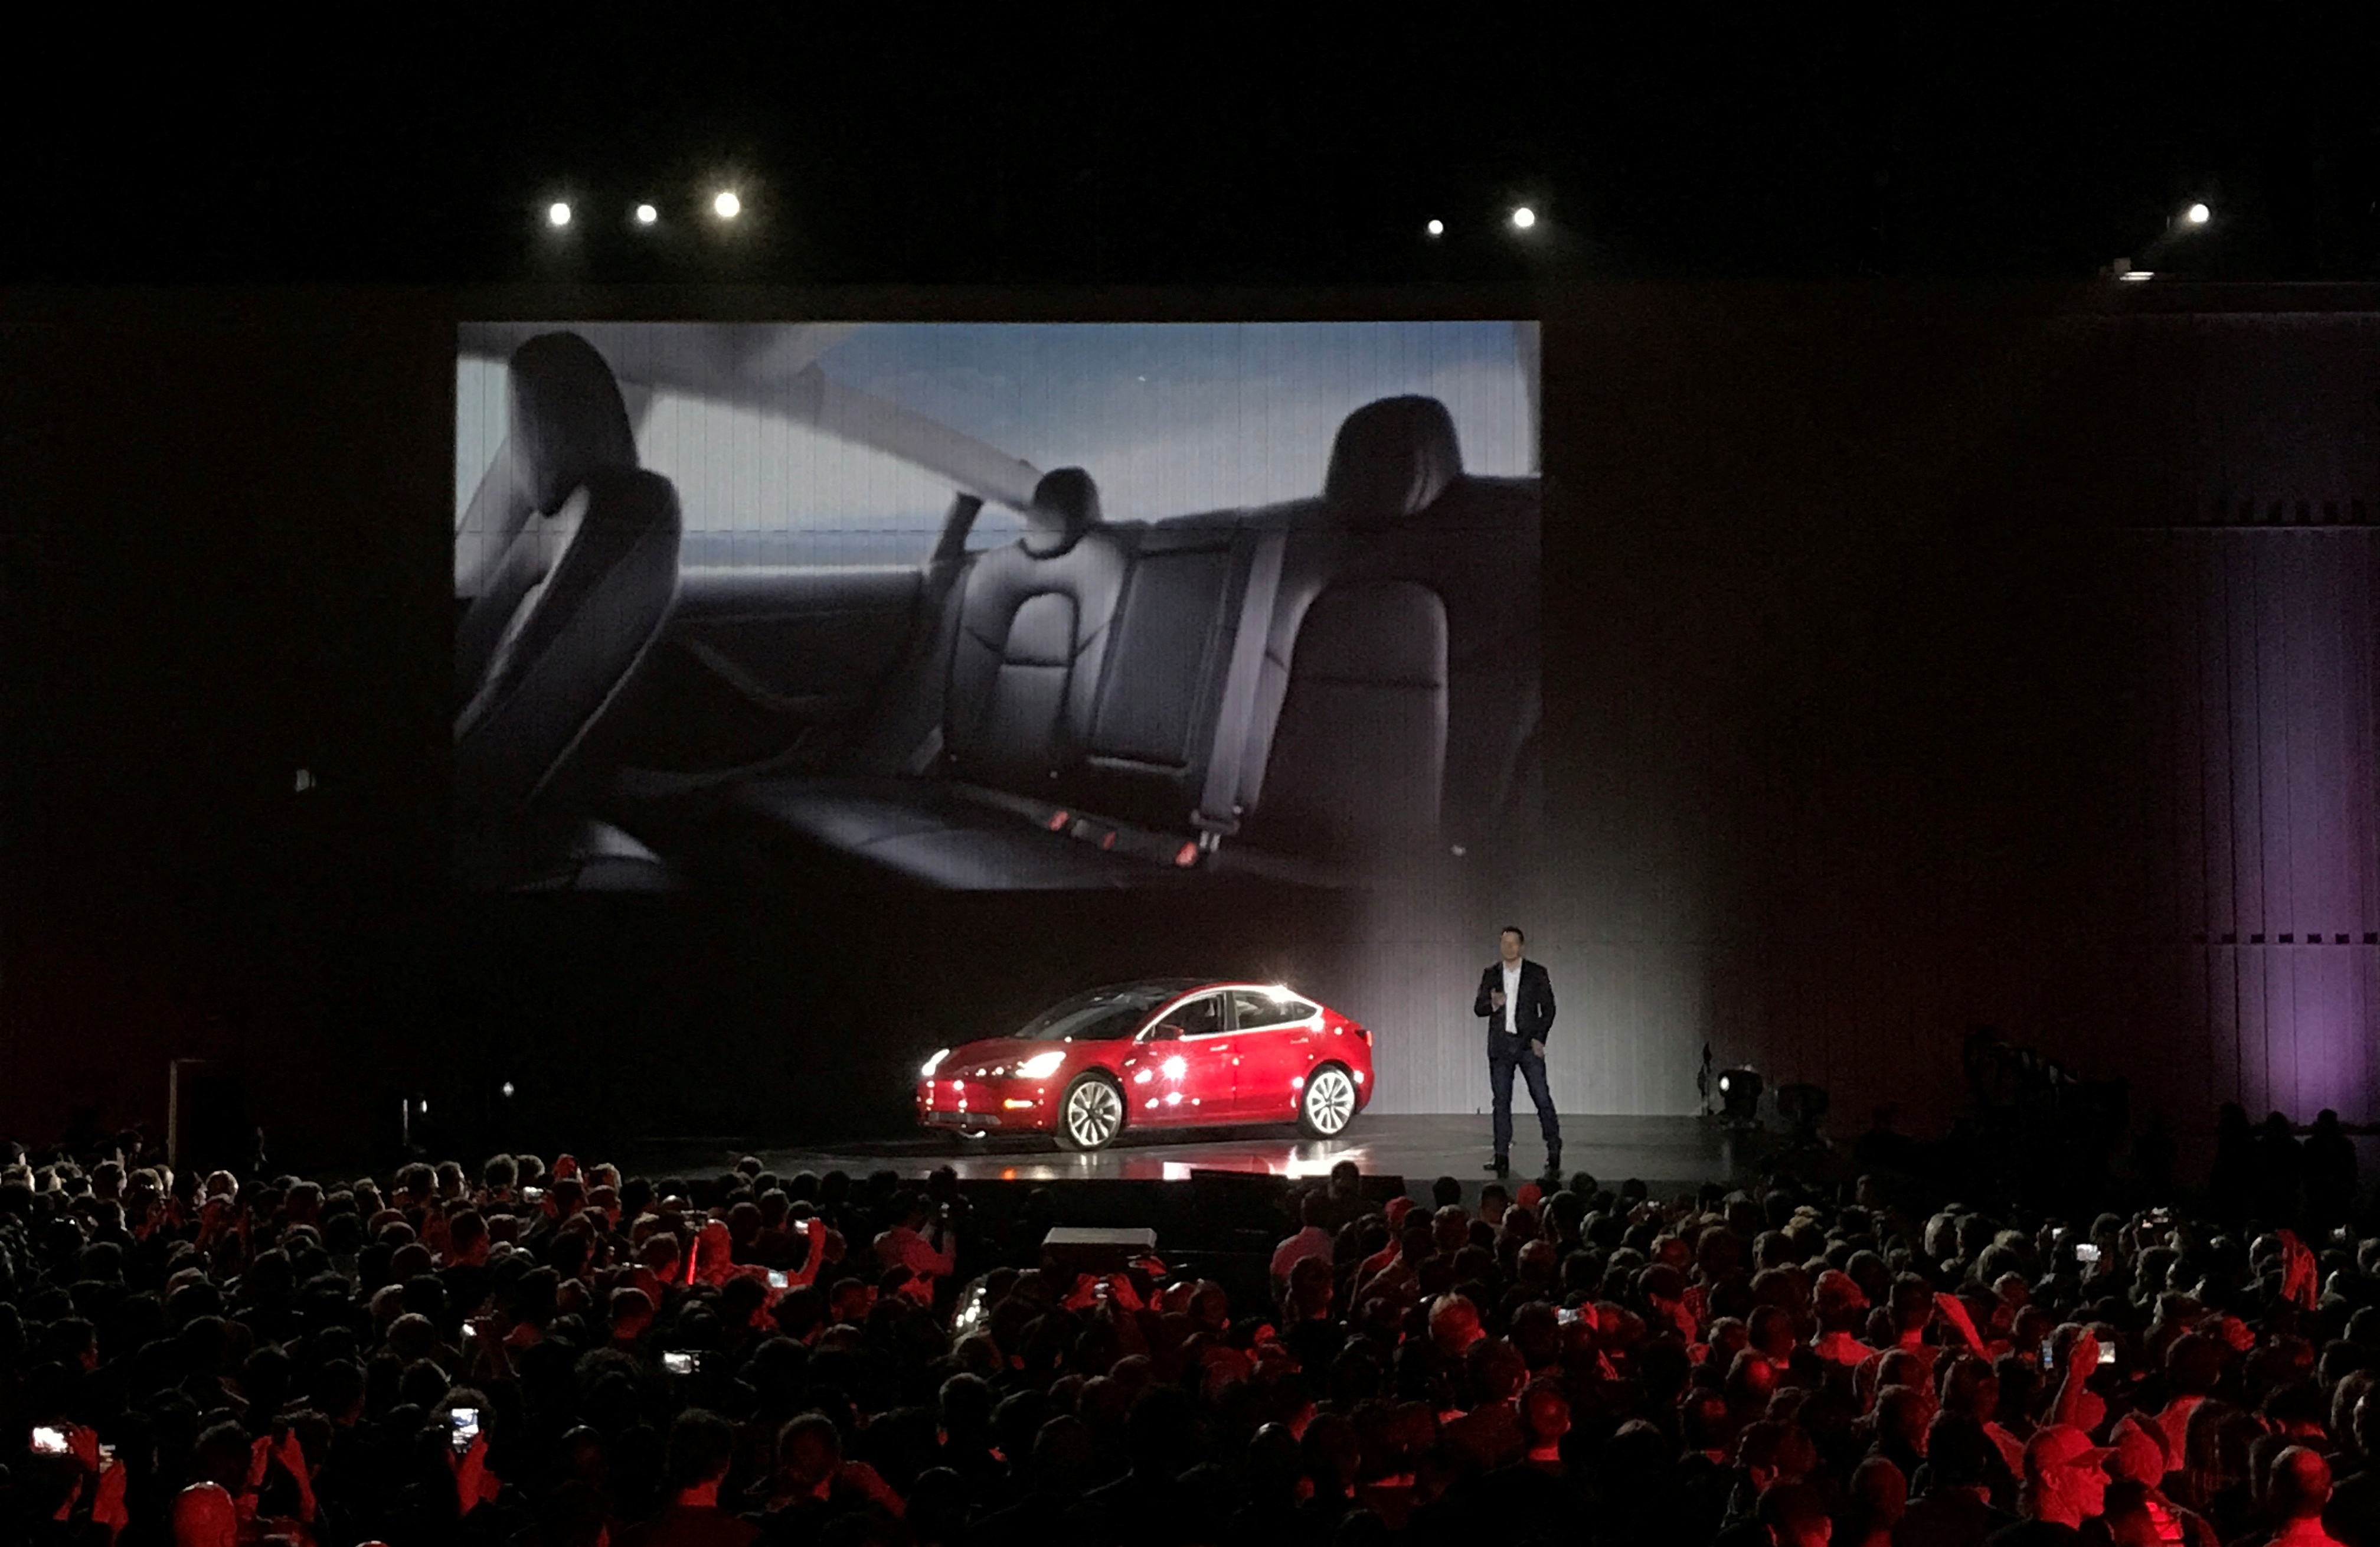 Tesla Chief Executive Elon Musk introduces one of the first Model 3 cars off the Fremont factory's production line during an event at the company's facilities in Fremont, California